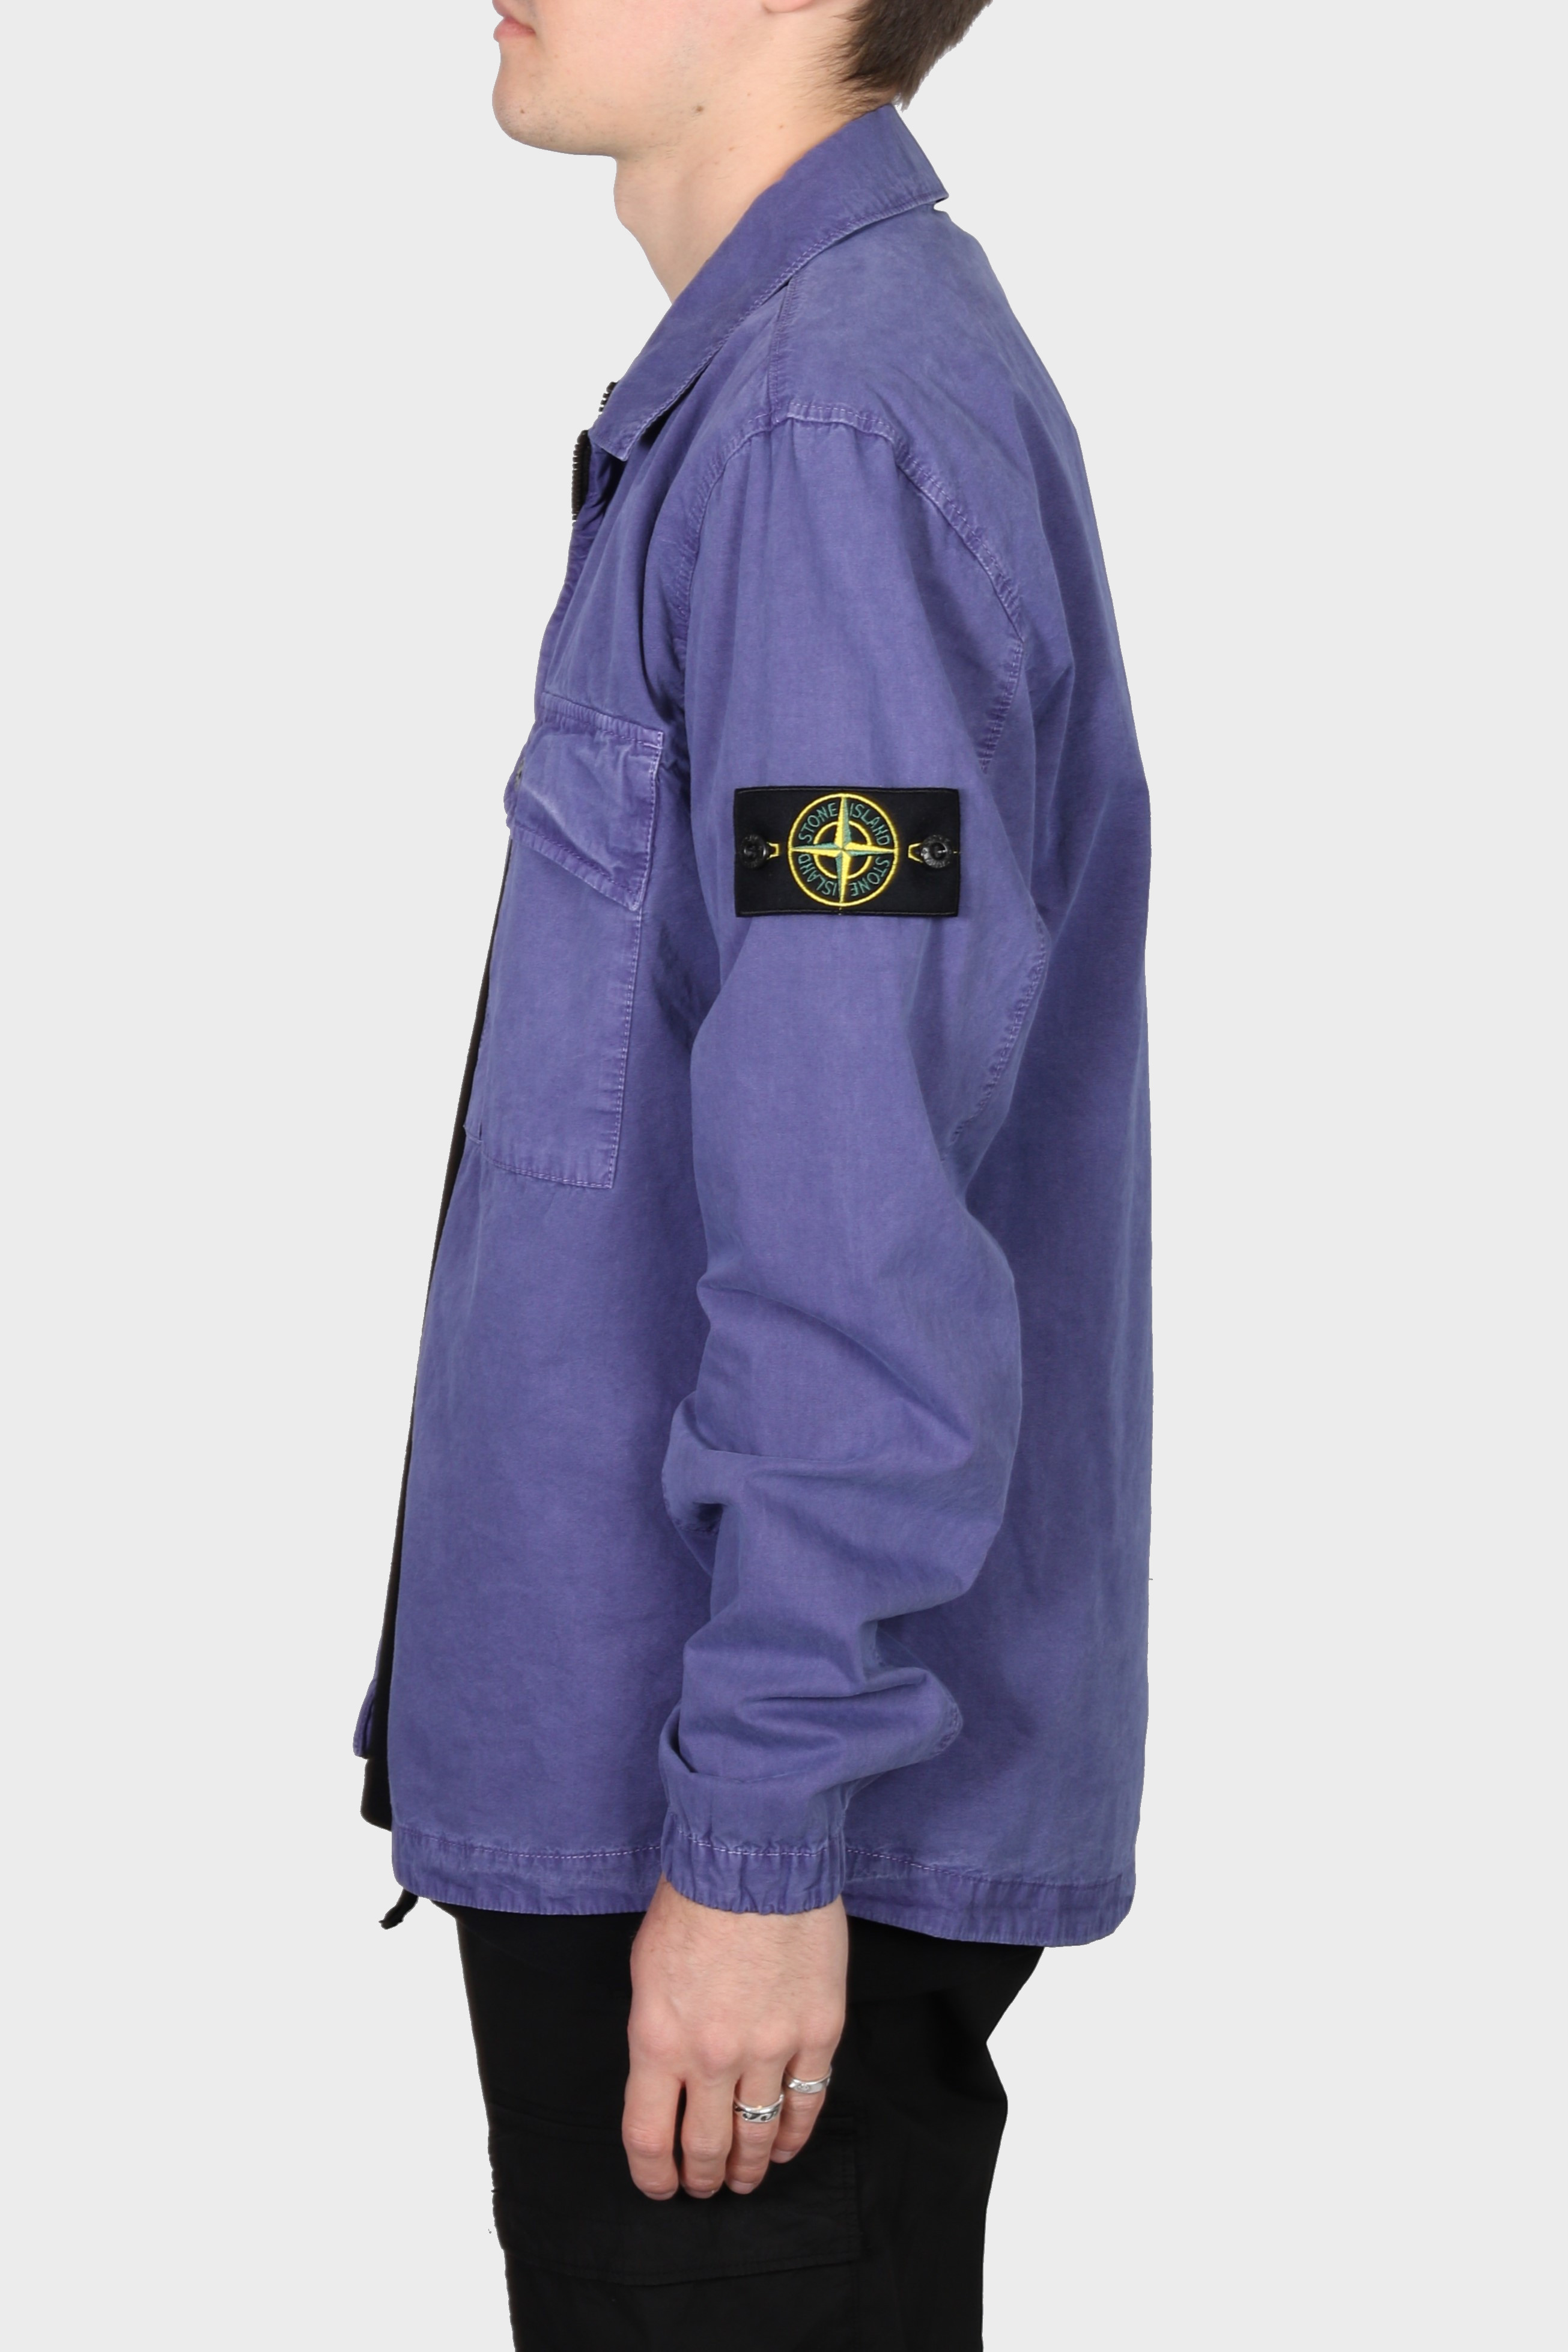 STONE ISLAND Overshirt in Washed Lilac M